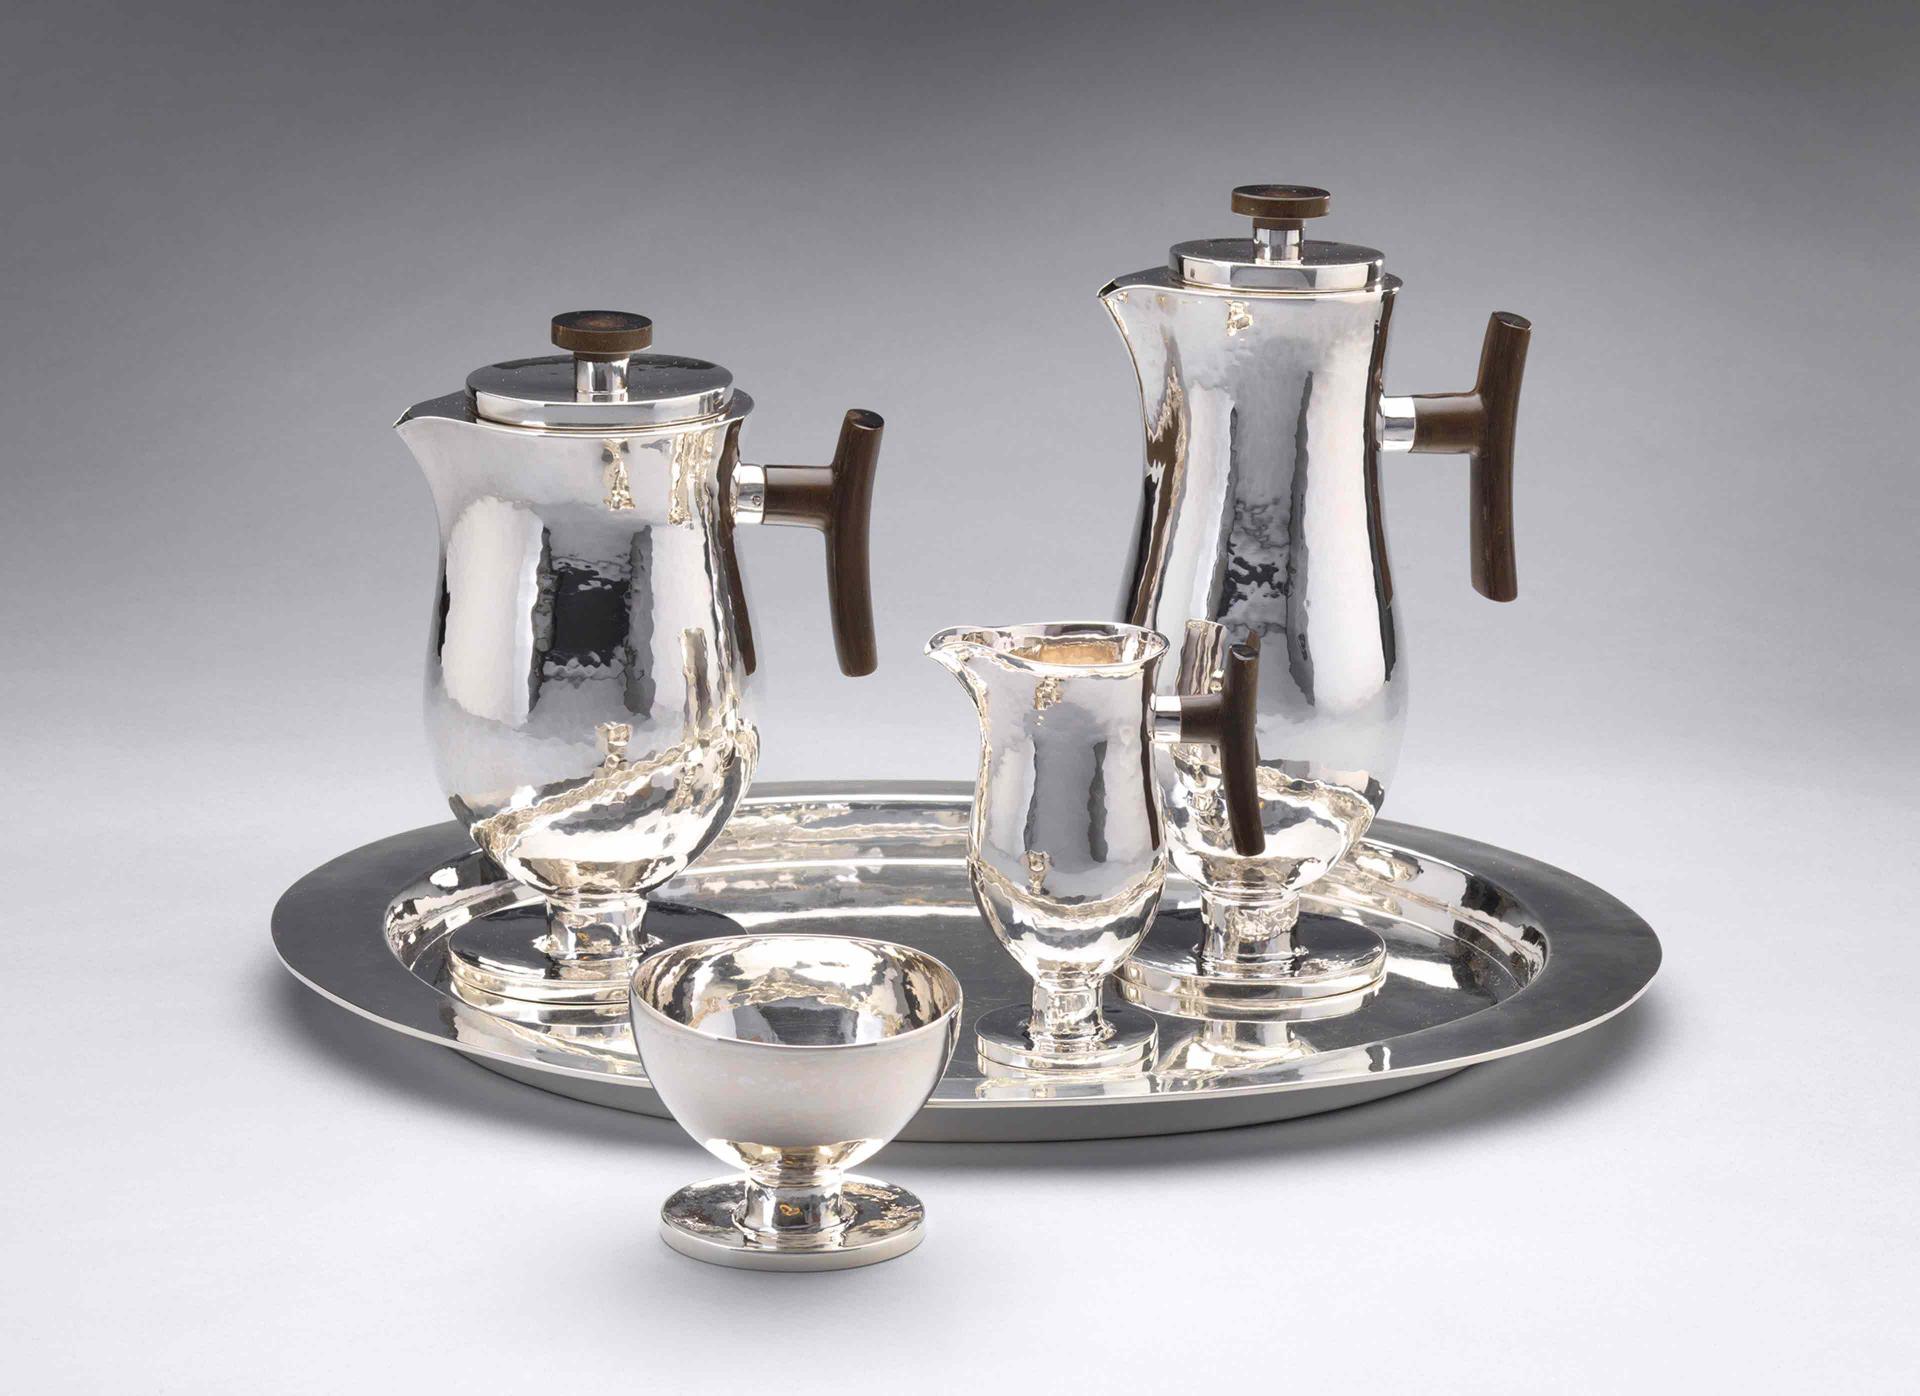 Silver coffee and tea set consisting of coffee pot, teapot, creamer, sugar bowl and tray